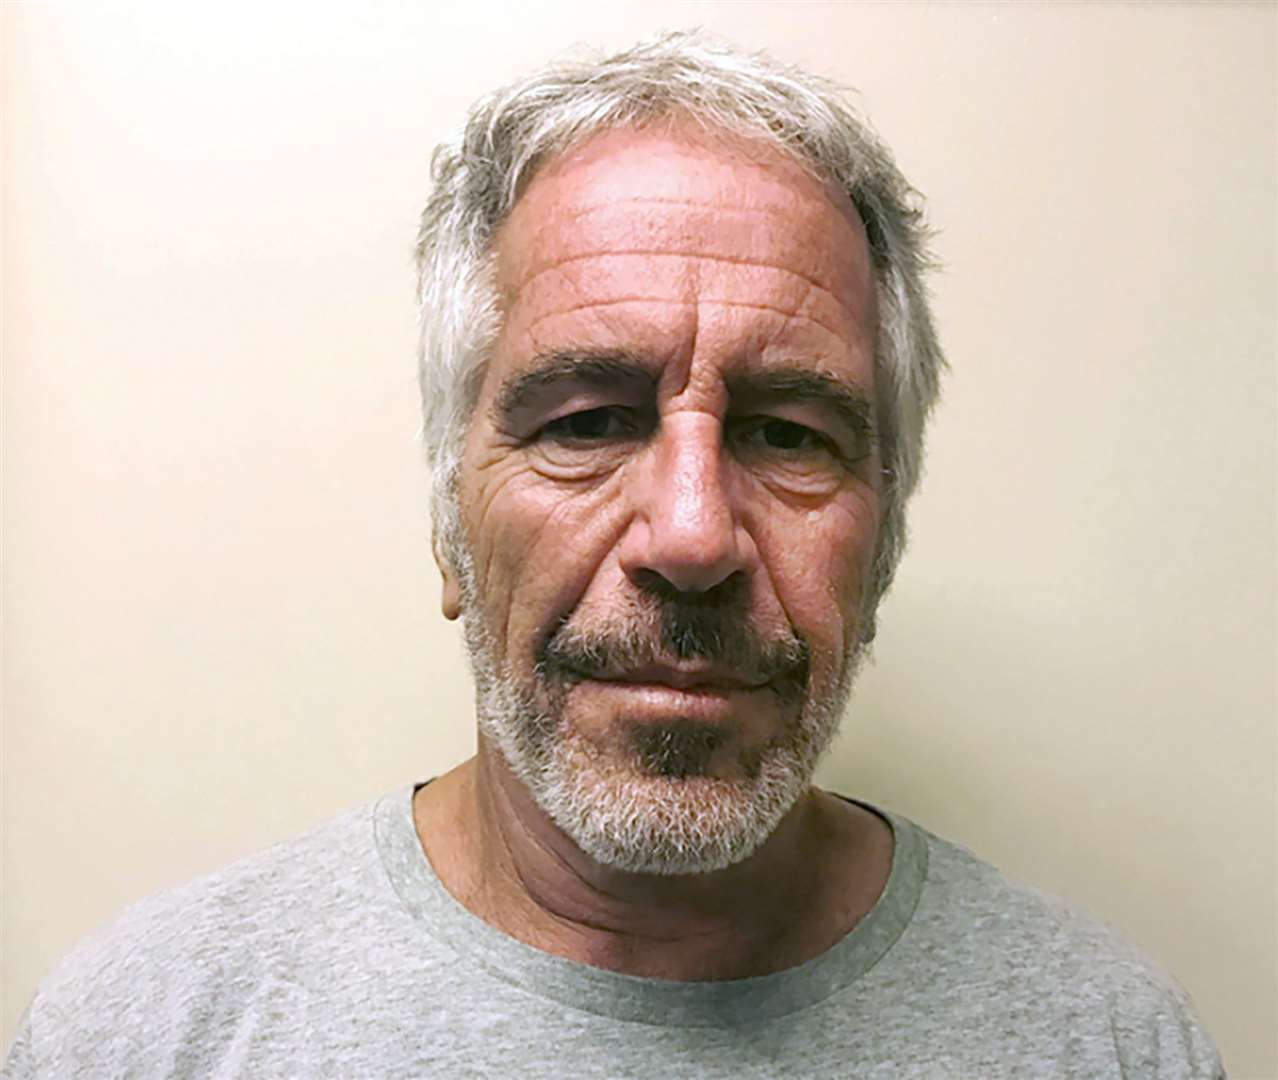 Jeffrey Epstein died in jail in 2019 while awaiting a sex-trafficking trial (New York State Sex Offender Registry via AP)